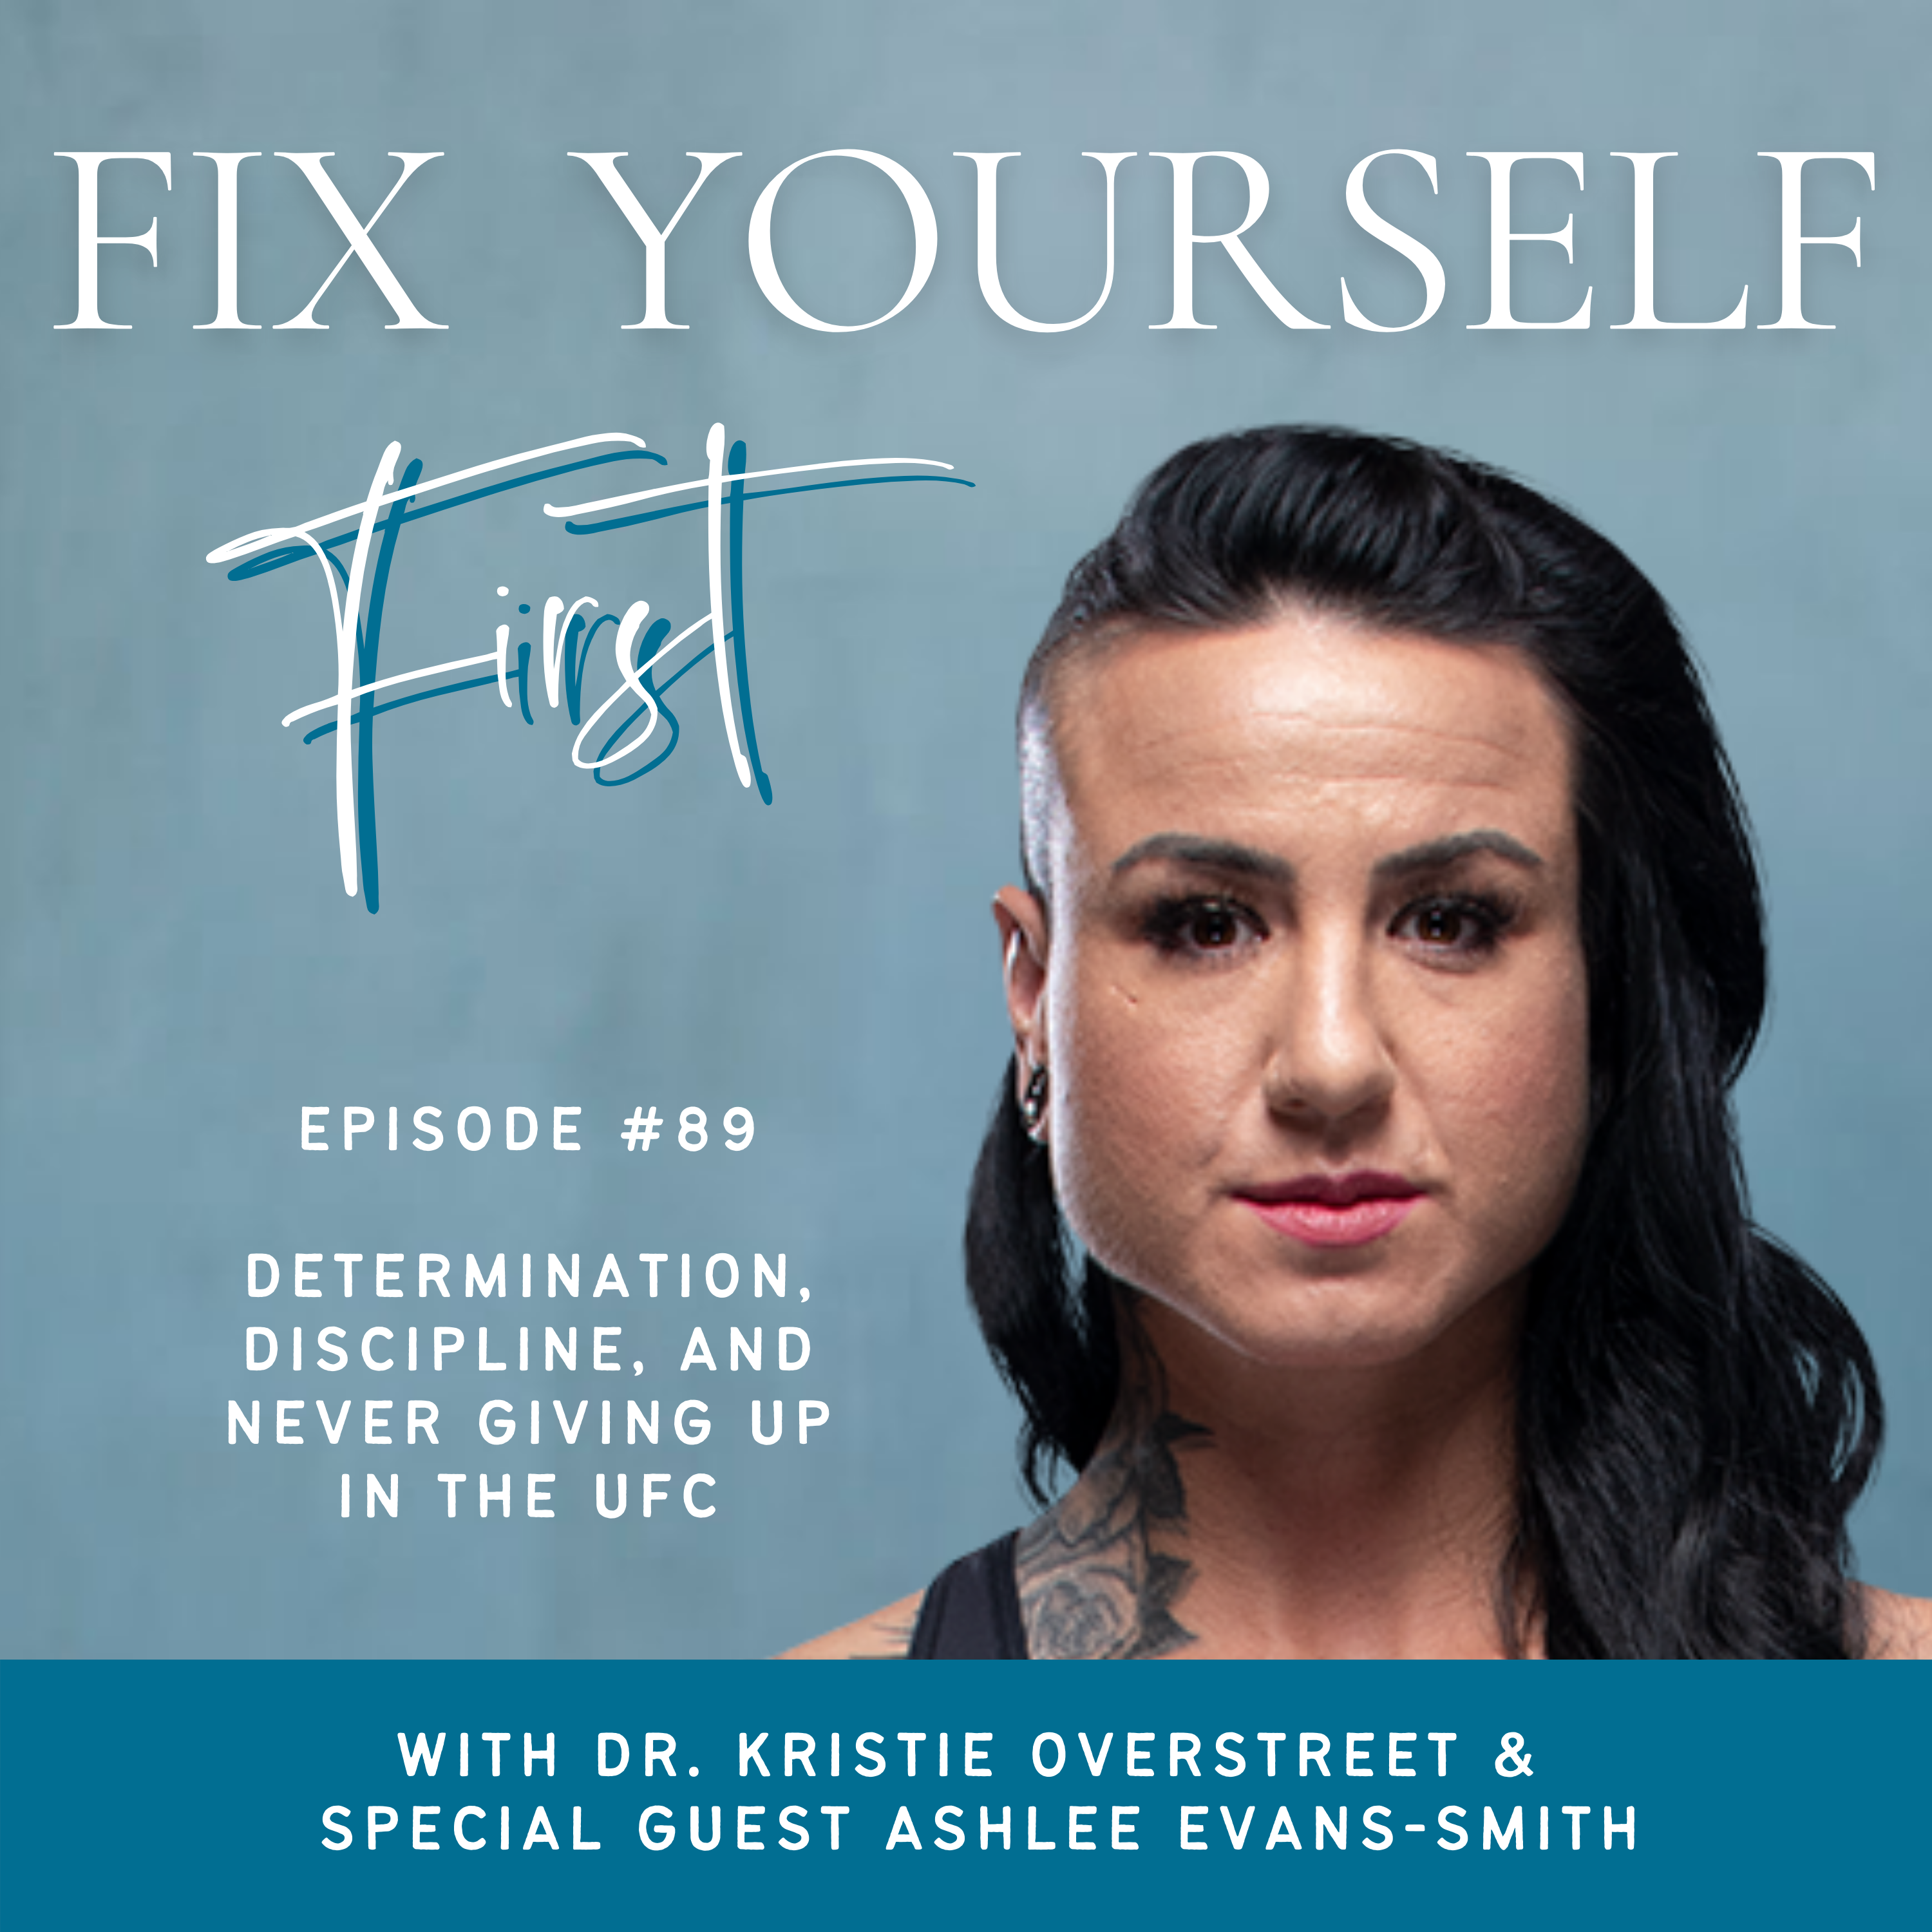 Fix Yourself First Episode 89 Determination, Discipline, and Never Giving Up in the UFC with Ashlee Evans-Smith